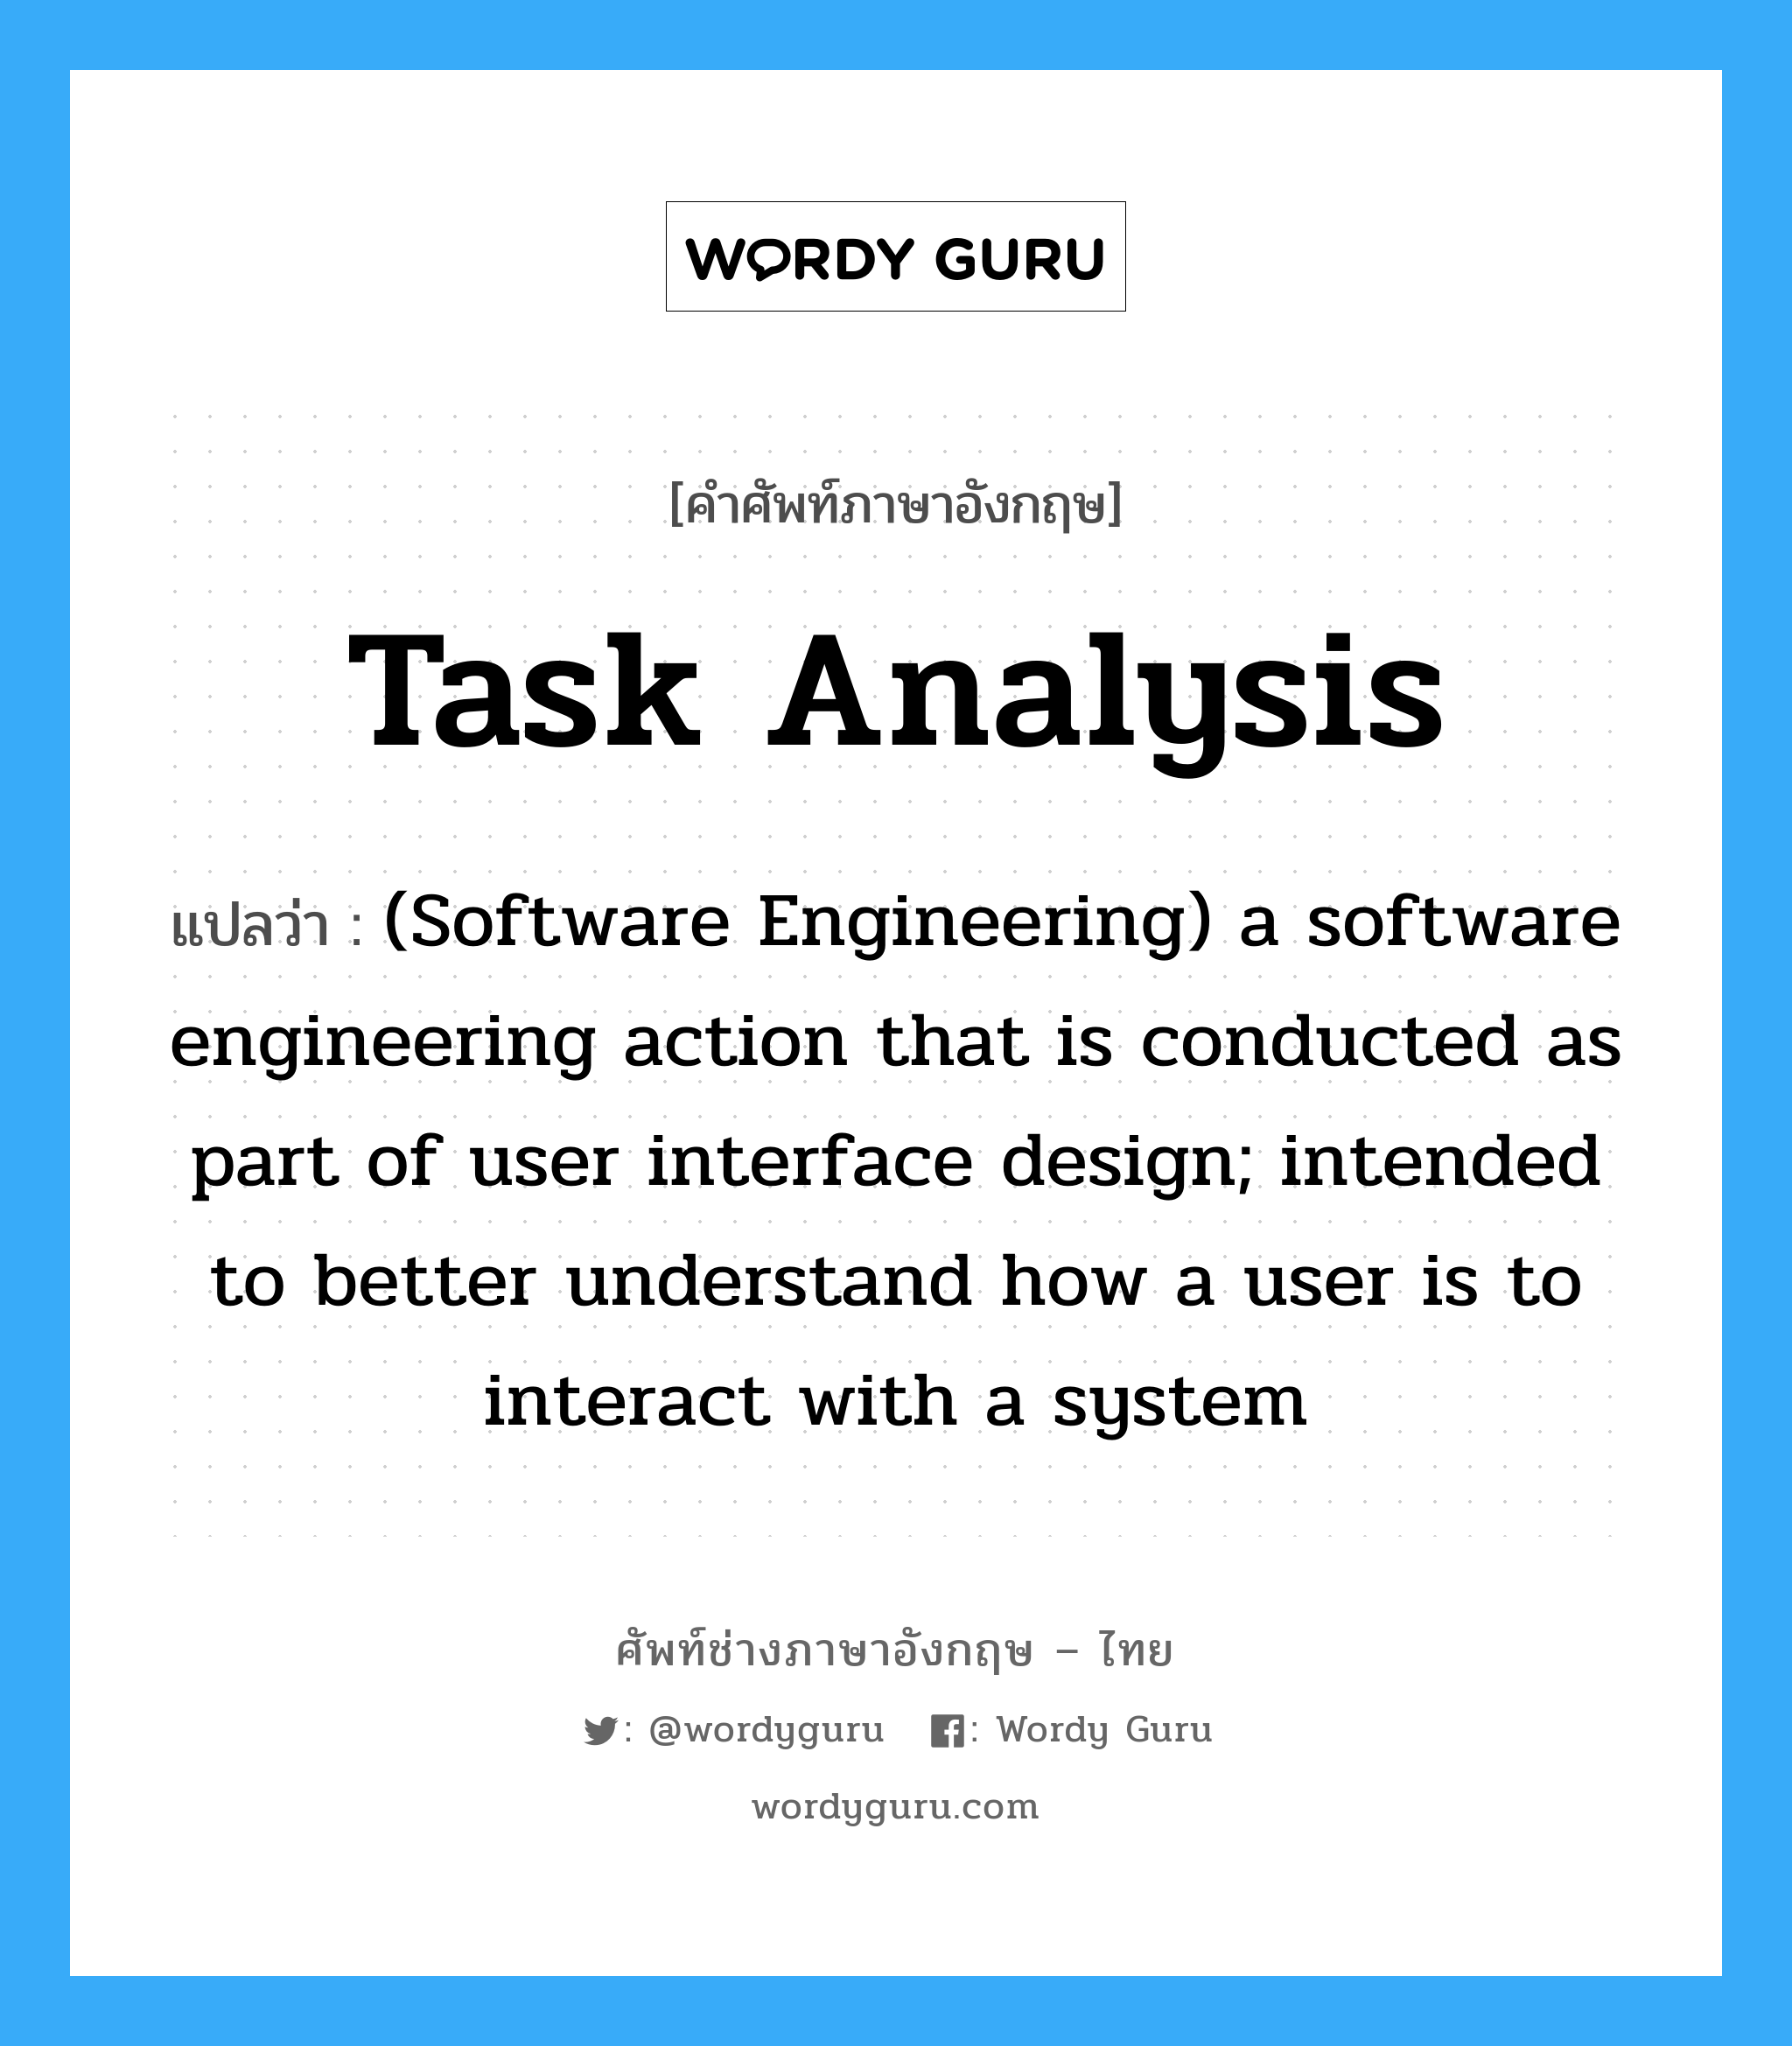 (Software Engineering) a software engineering action that establishes the structure and workflow for a user interface; follows three "golden rules:" place the user in control, reduce the user's memory leoad, make the interface consistent. ภาษาอังกฤษ?, คำศัพท์ช่างภาษาอังกฤษ - ไทย (Software Engineering) a software engineering action that is conducted as part of user interface design; intended to better understand how a user is to interact with a system คำศัพท์ภาษาอังกฤษ (Software Engineering) a software engineering action that is conducted as part of user interface design; intended to better understand how a user is to interact with a system แปลว่า Task analysis